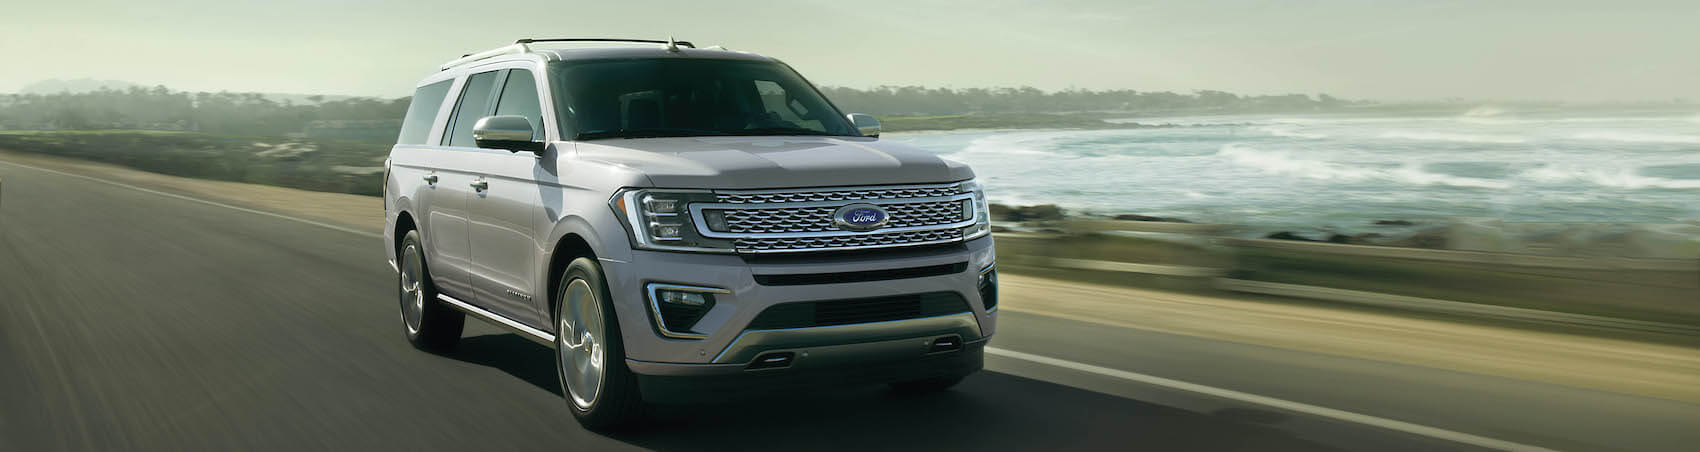 Ford Expedition Trim Levels